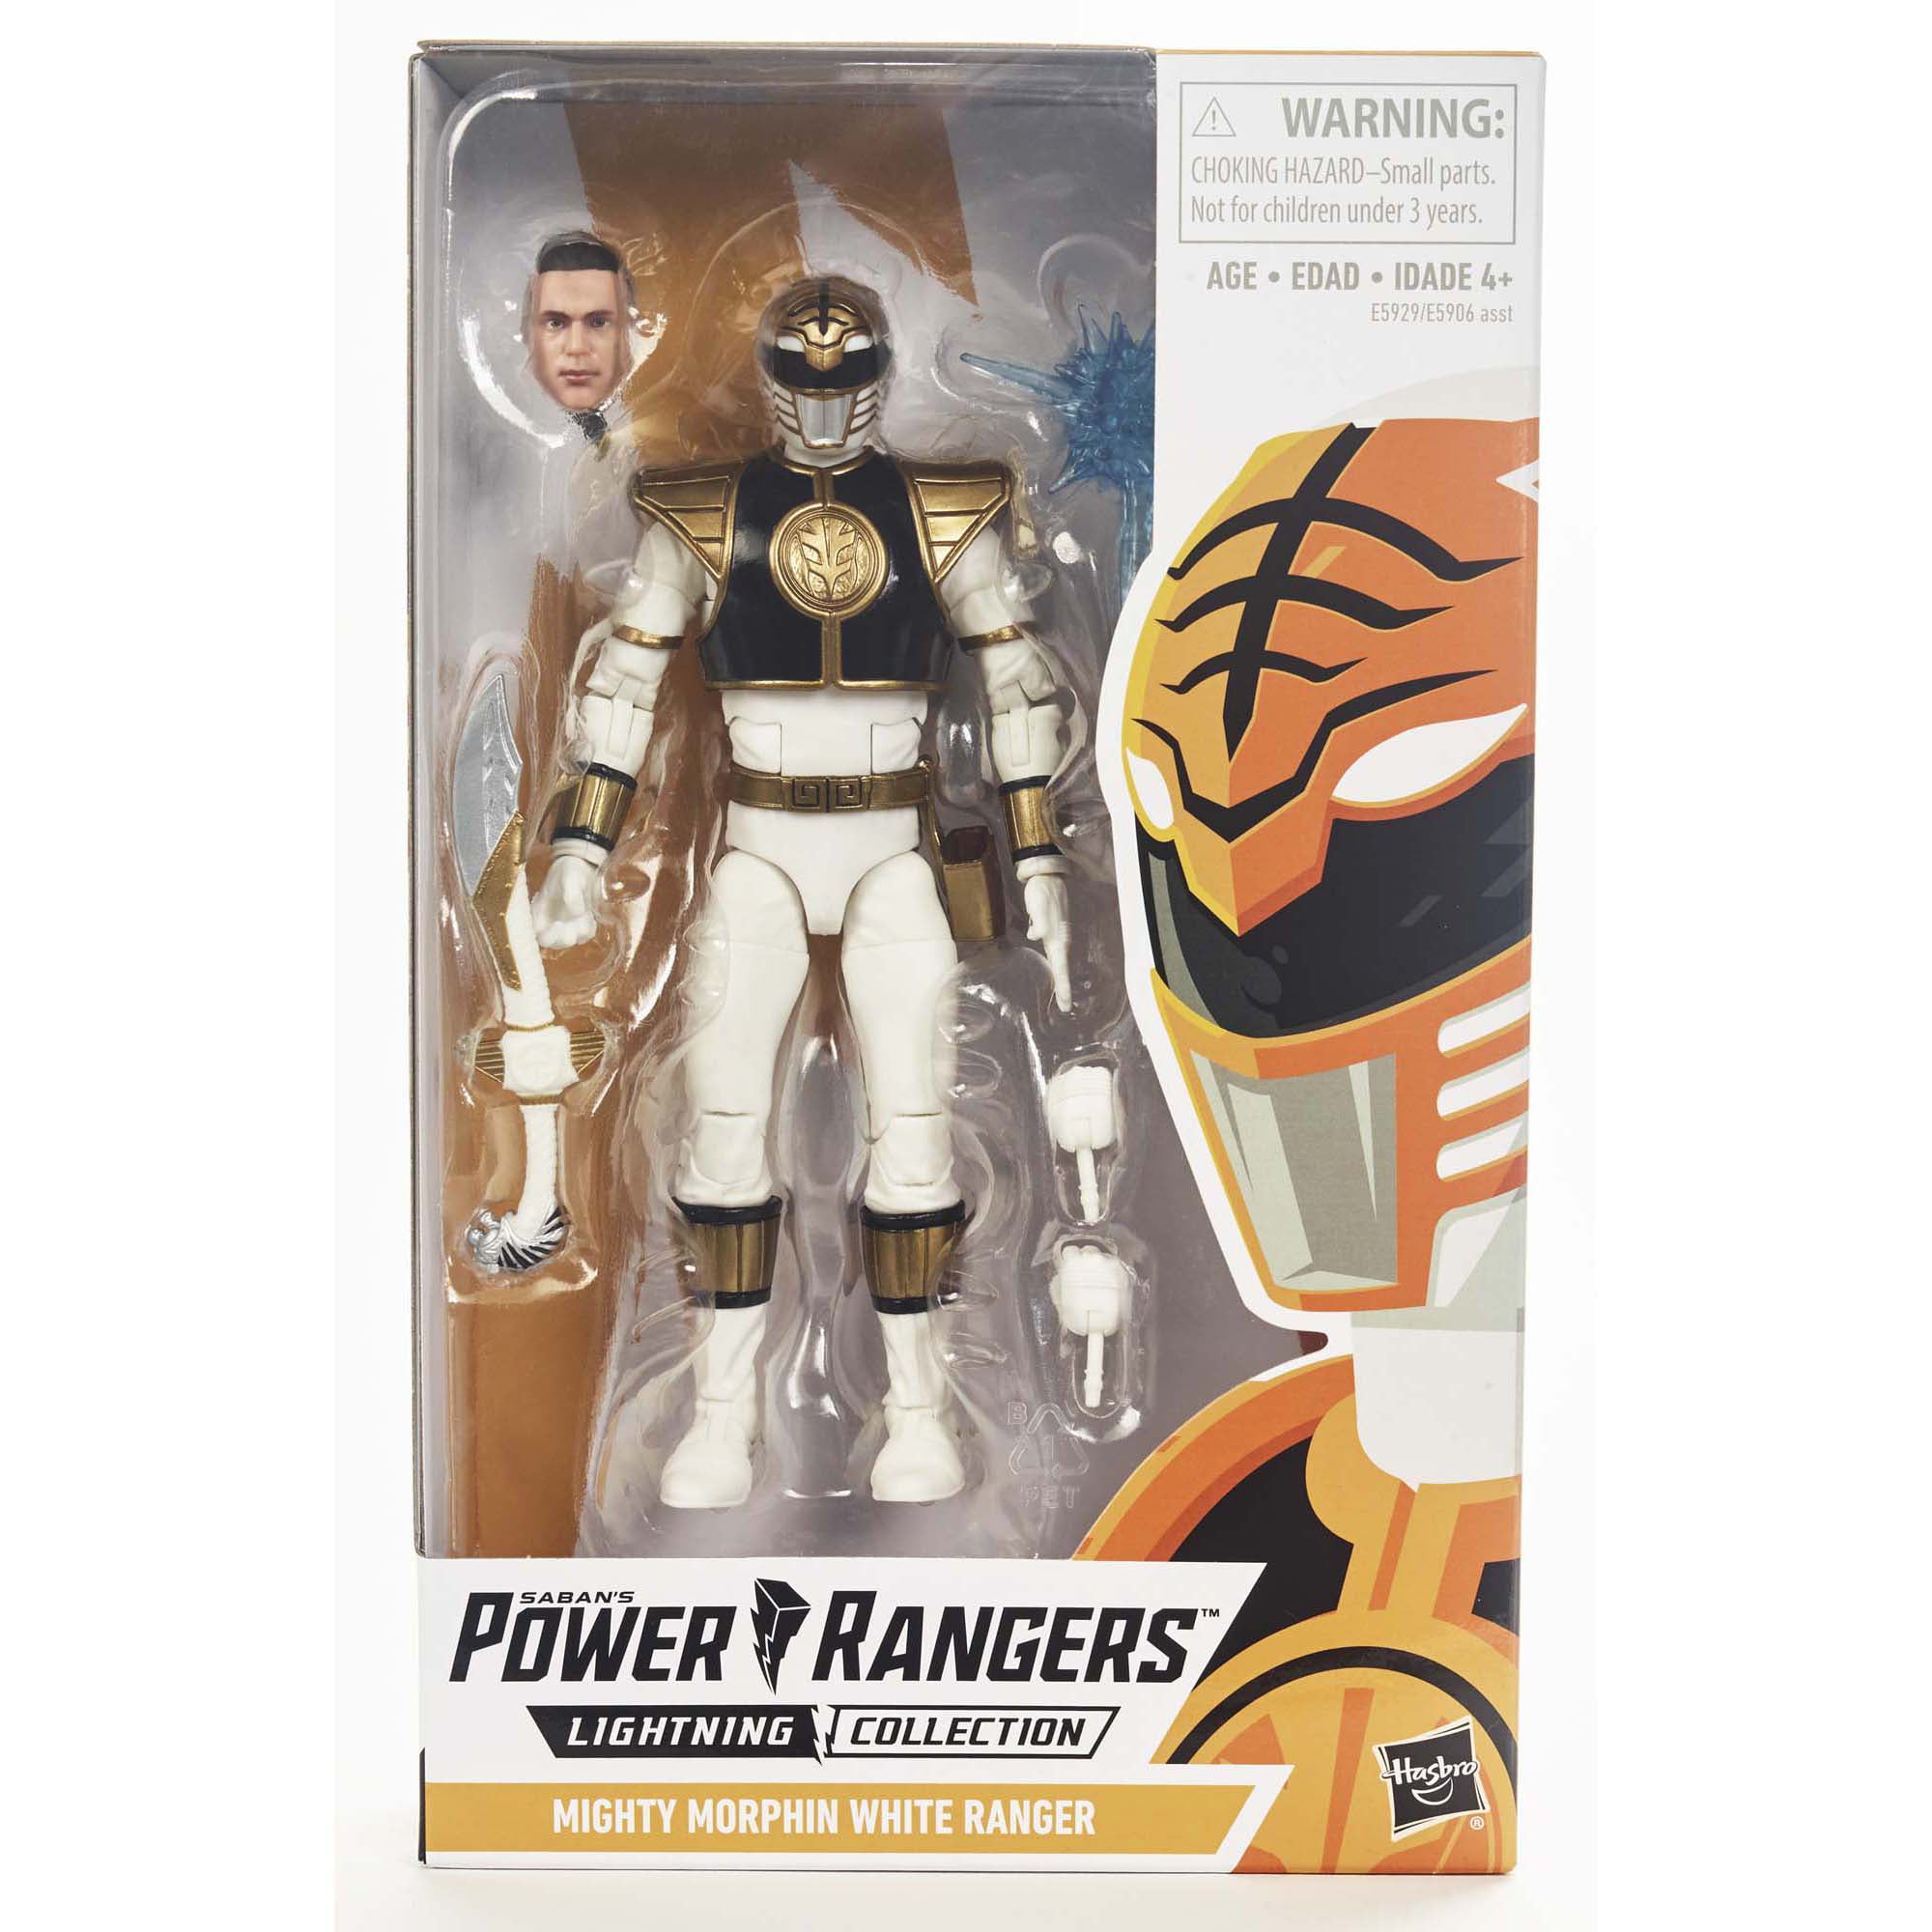 Hasbro Power Rangers Lightning Collection Mighty Morphin White Ranger 6in Action Figure for sale online 